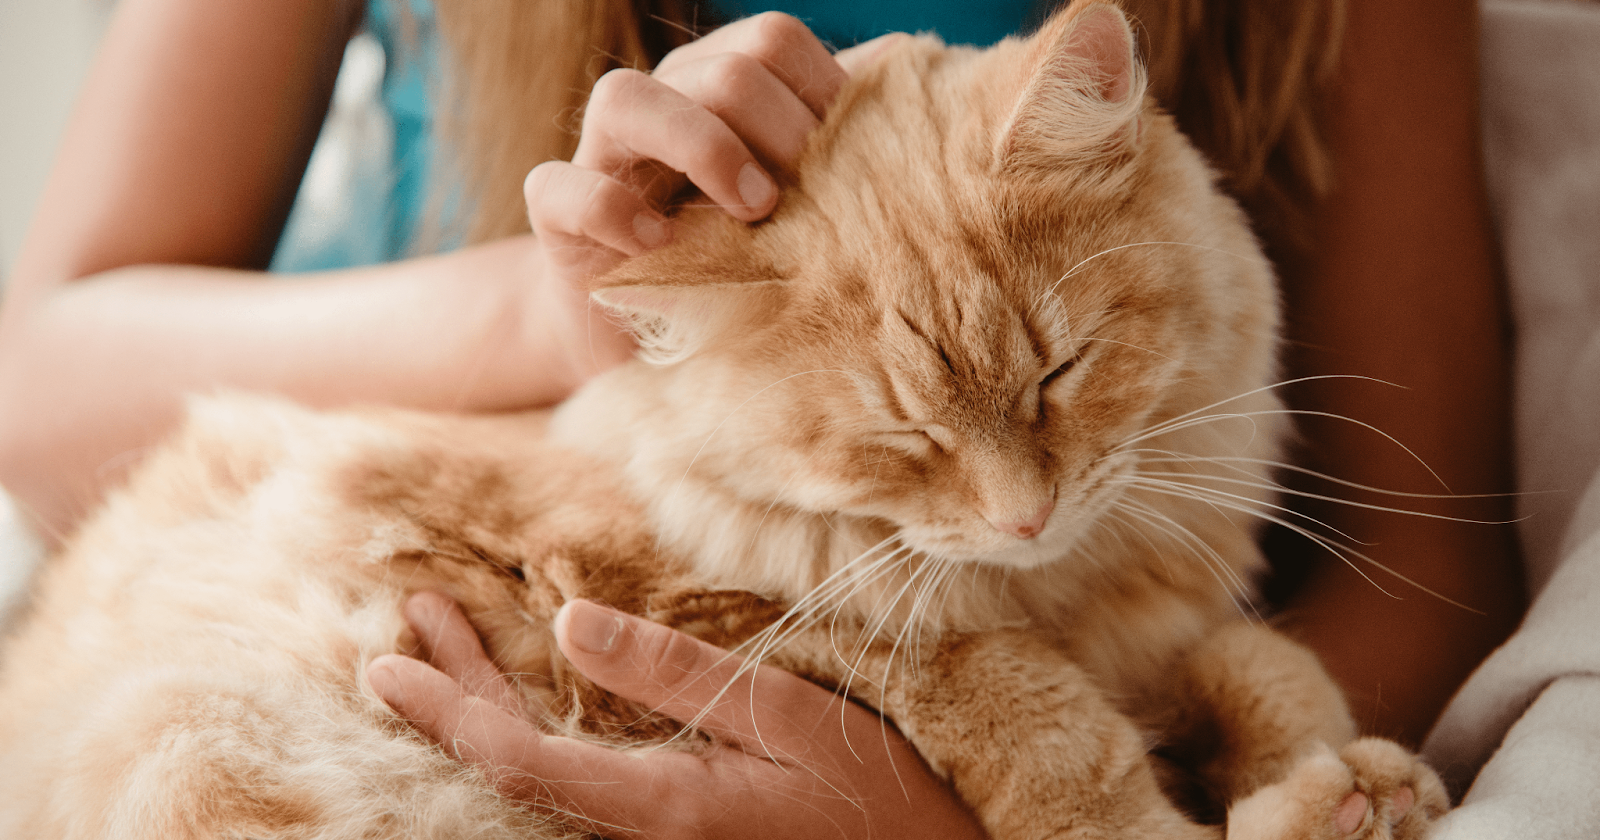 Orange tabby on a woman's lap happily being pet